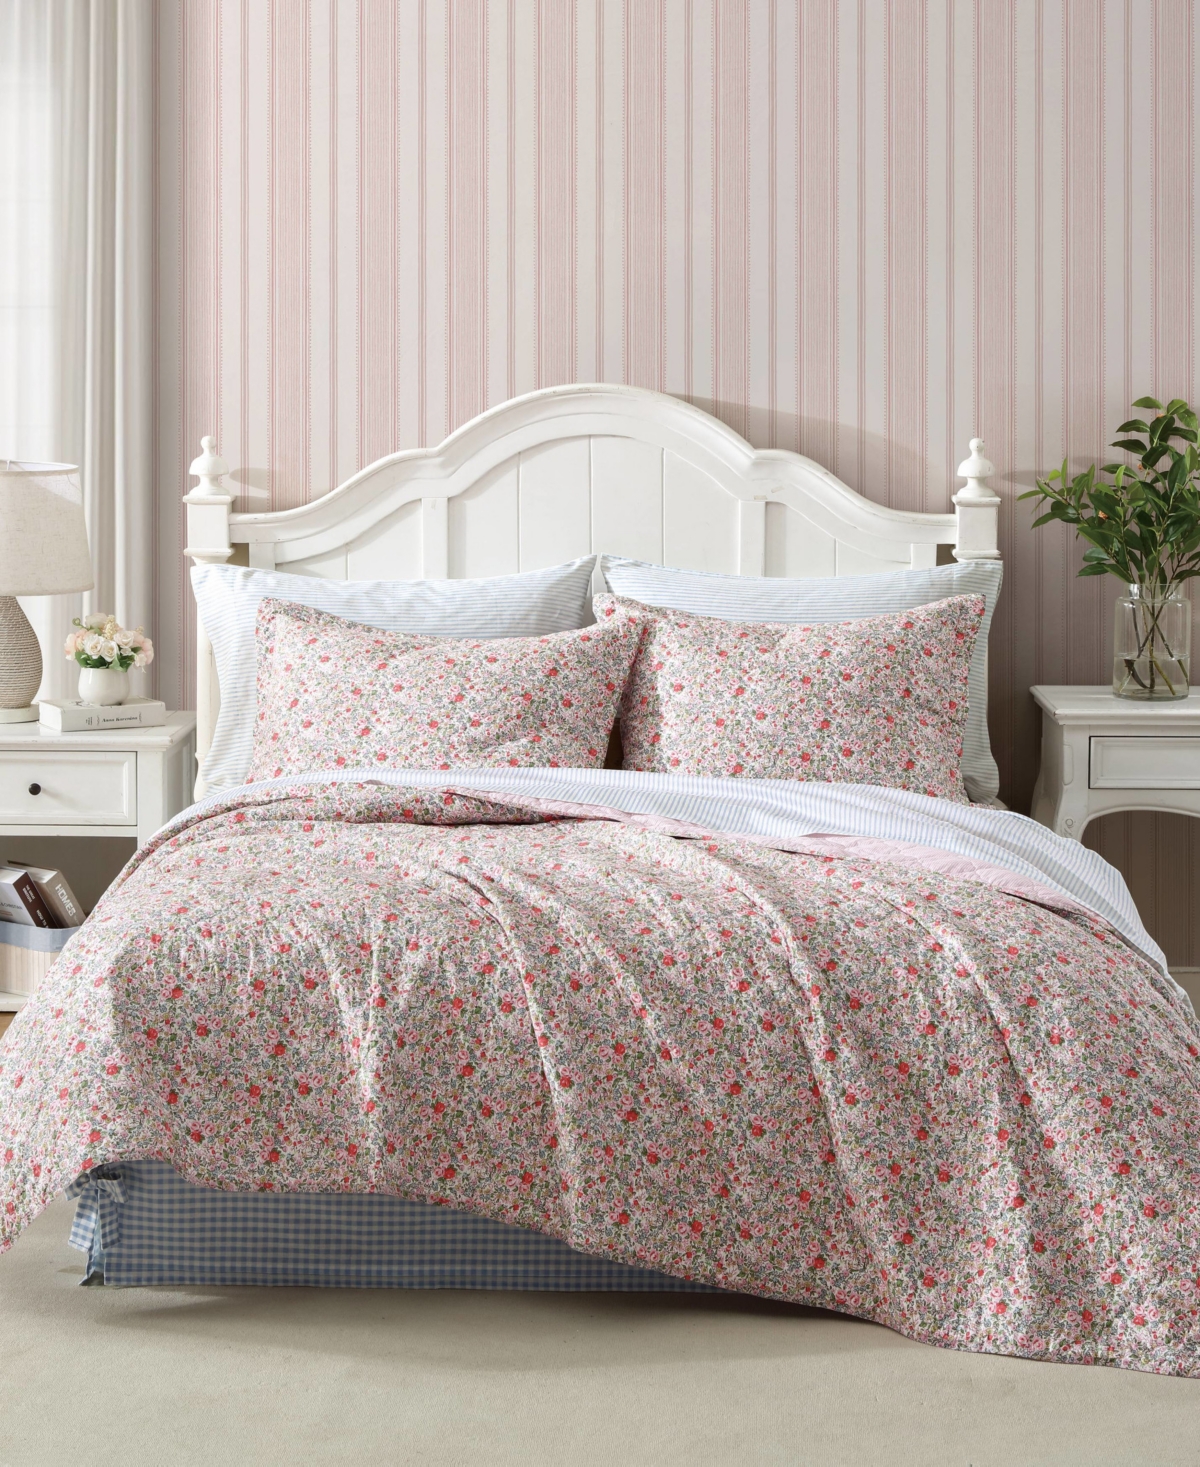 Laura Ashley Rowena Cotton Reversible Quilt, Twin In Cherry Pink